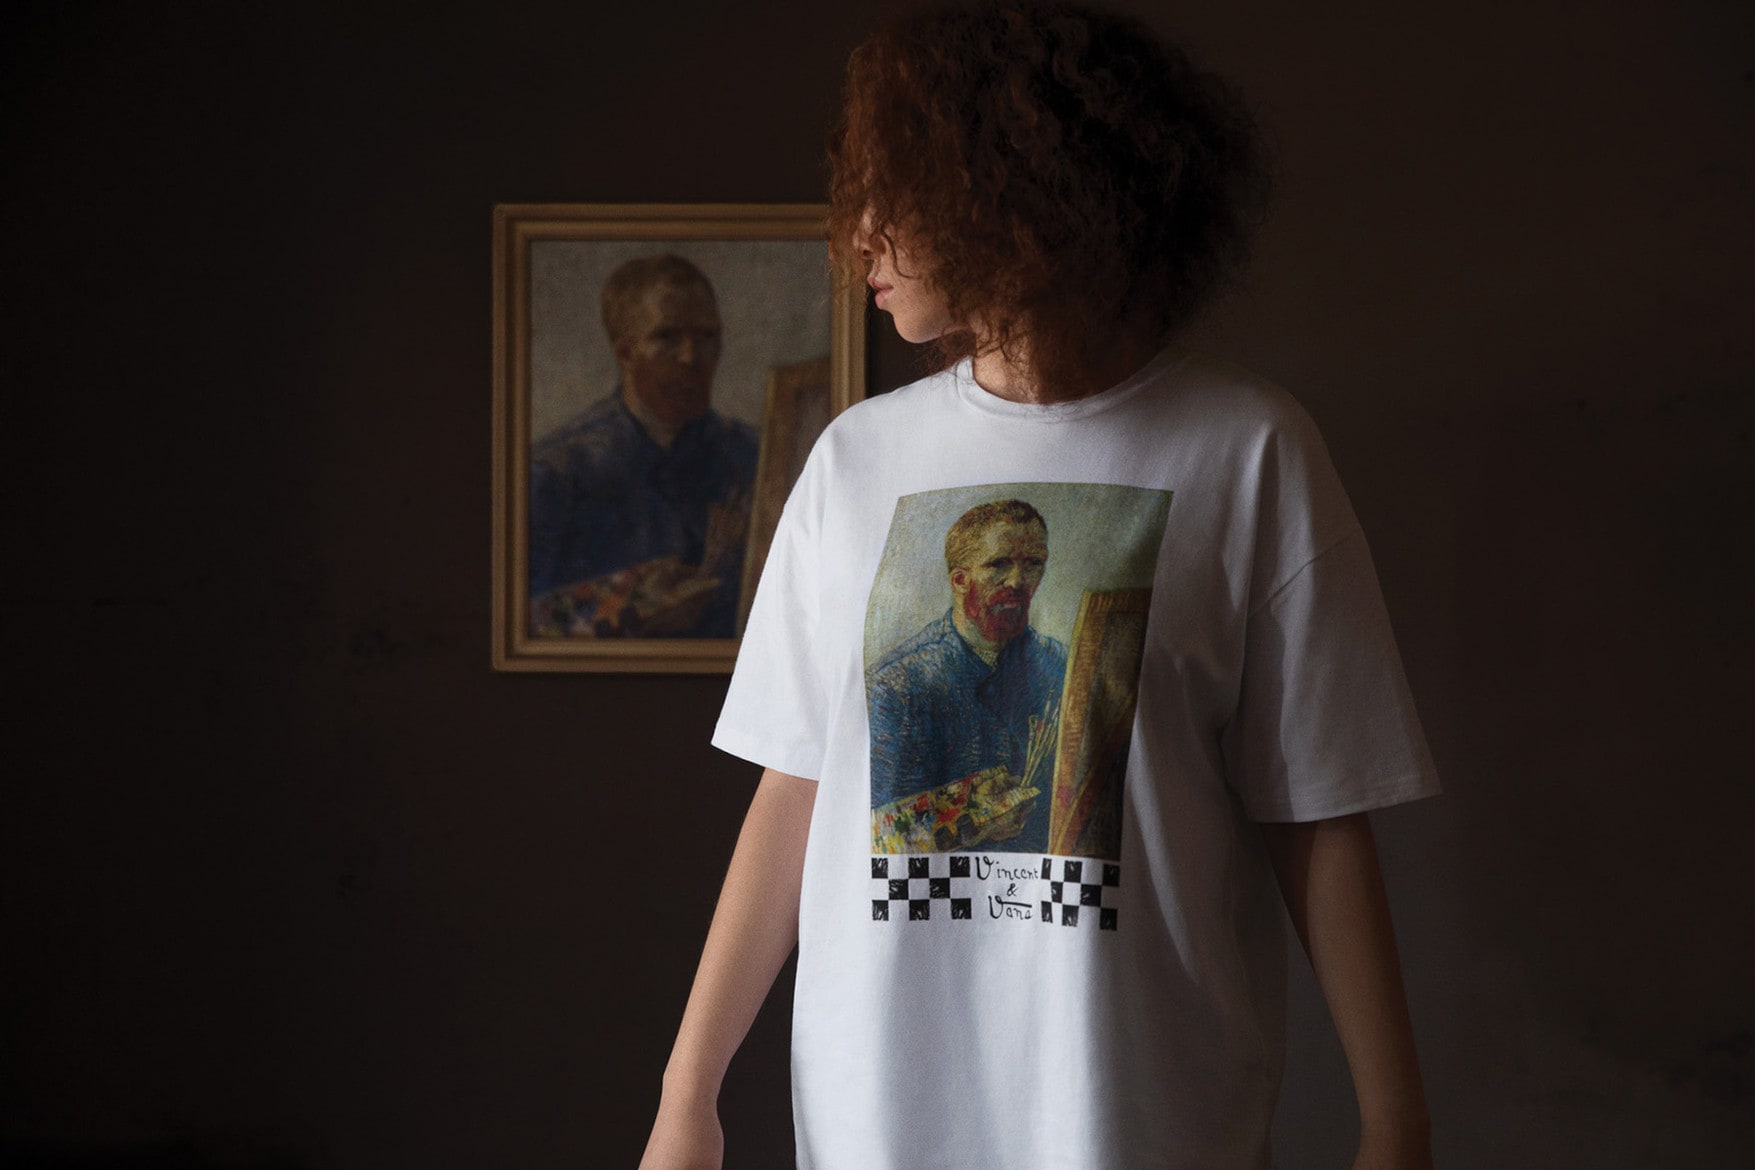 END. Features | Check out the Vans x Van Gogh Lookbook